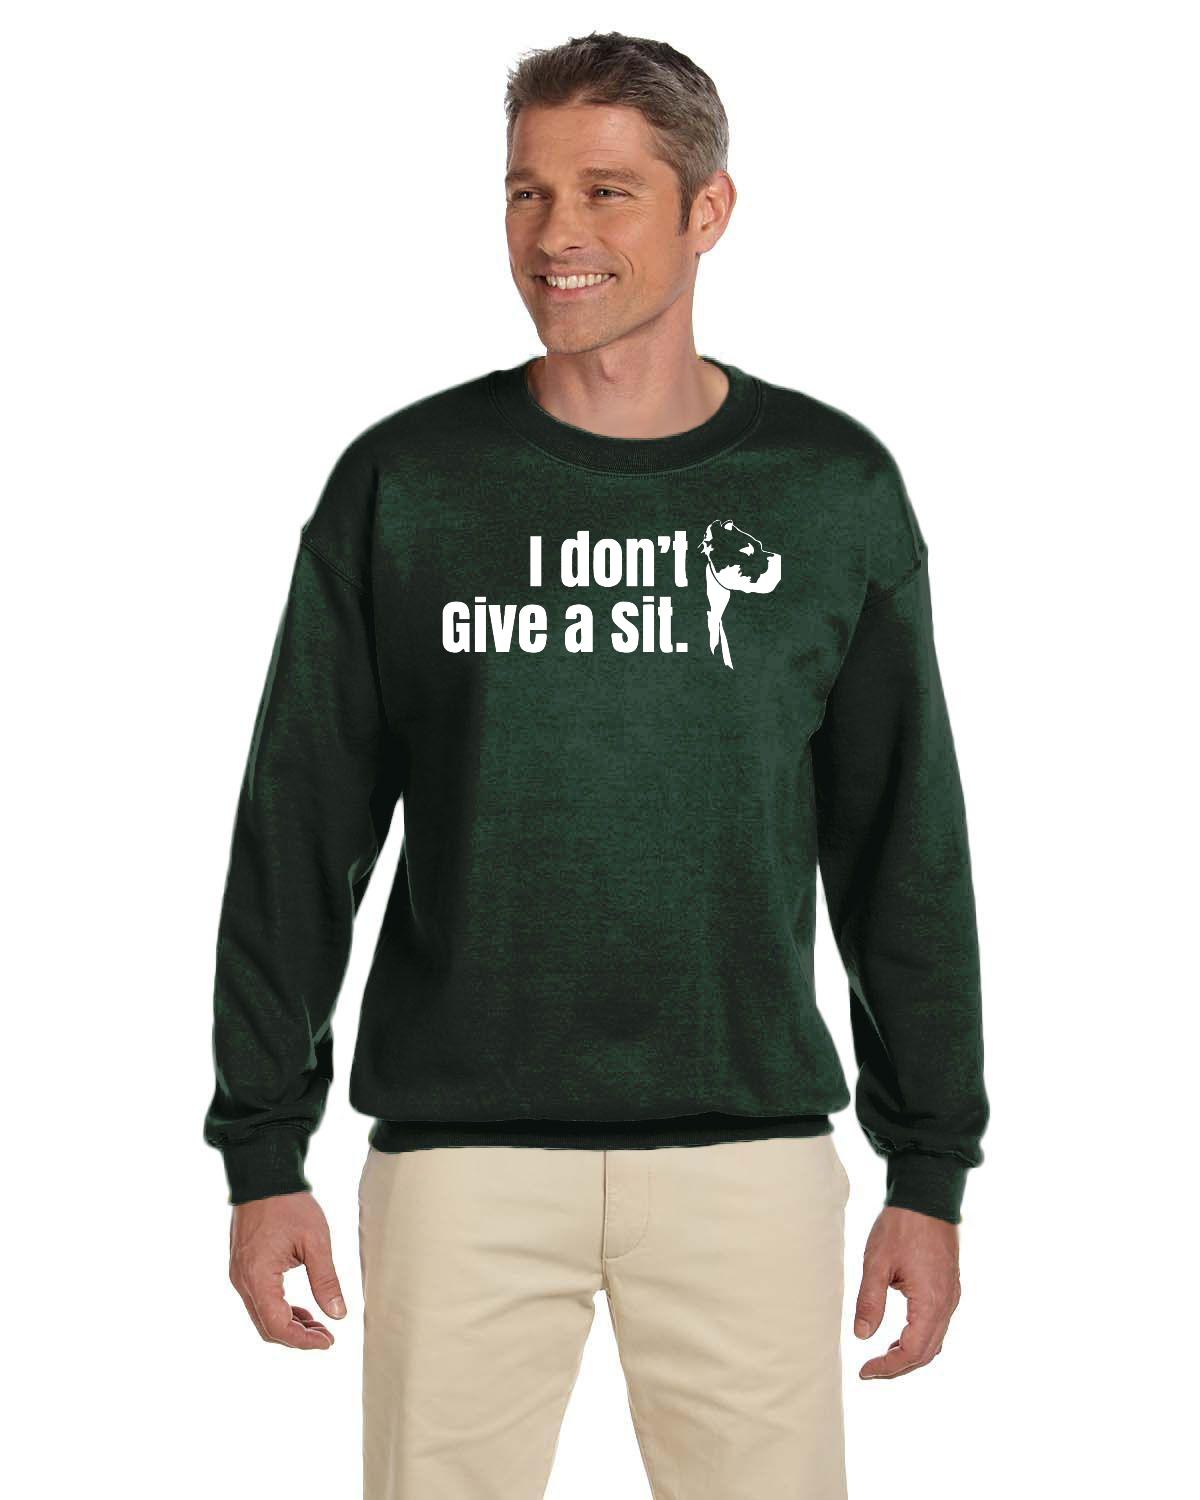 CDAC "I Don't Give A Sit" Adult Crewneck Sweater Dark colours